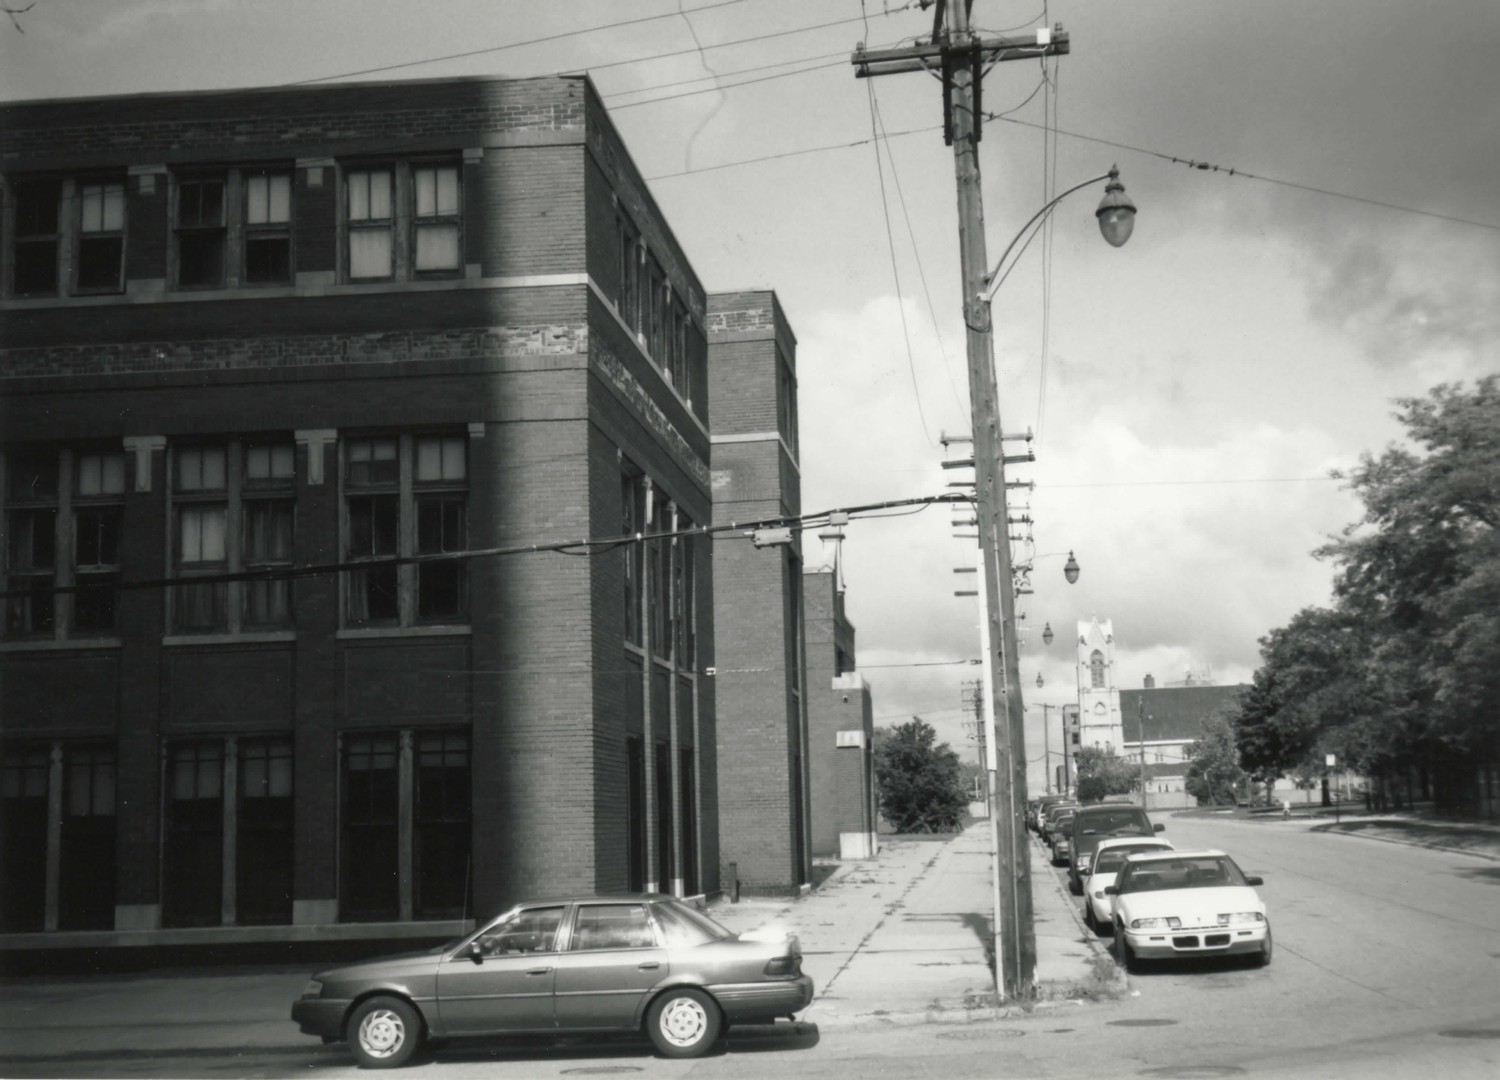 Nellie Leland School, Detroit Michigan Looking north on Antietam Street with east facade on the left and St. John's-St. Luke's Evangelical Church in the background (2001)